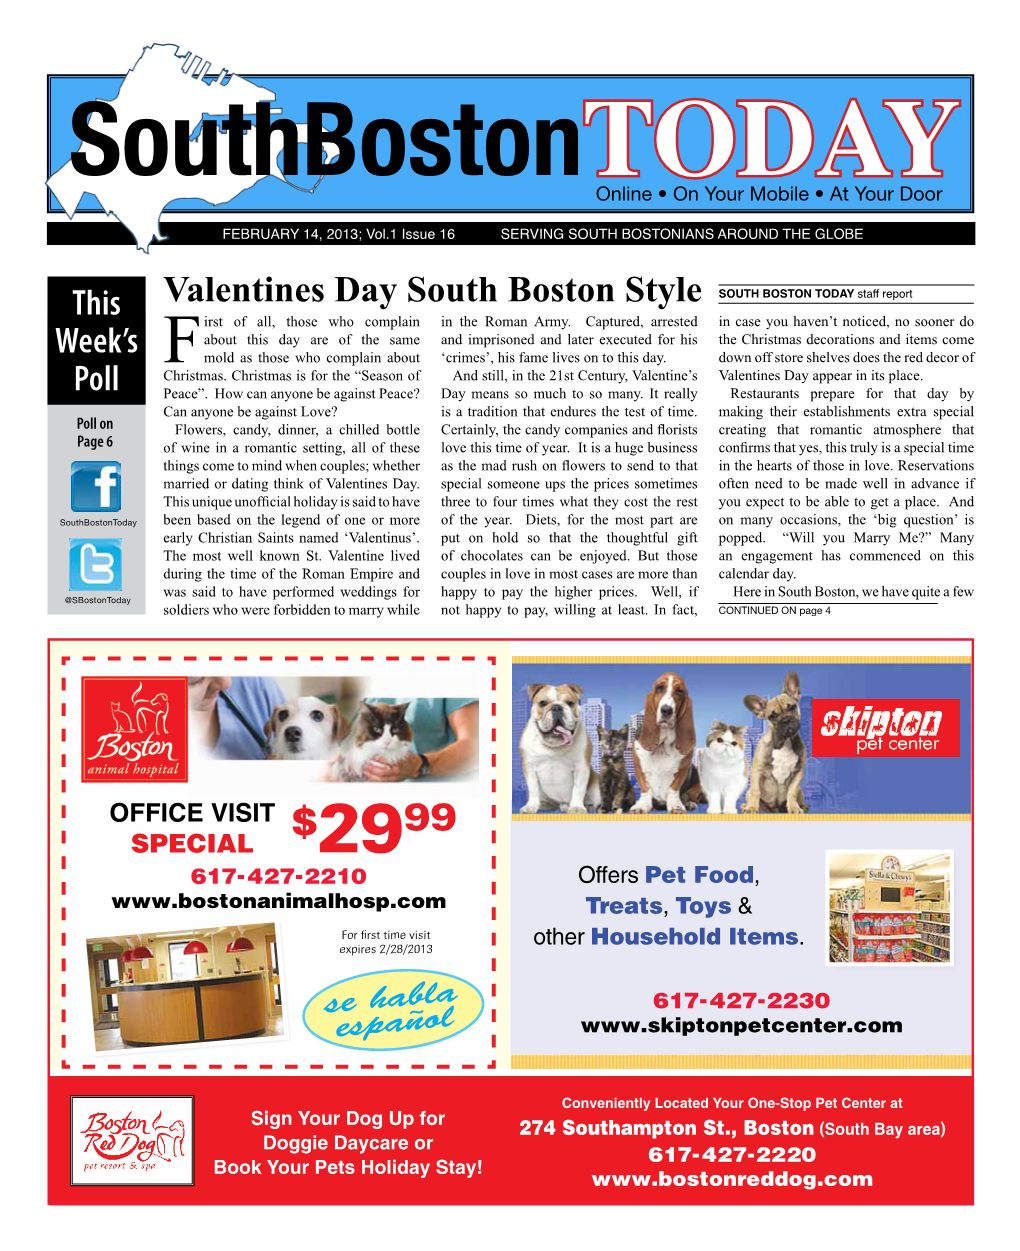 Valentines Day South Boston Style This Week's Poll